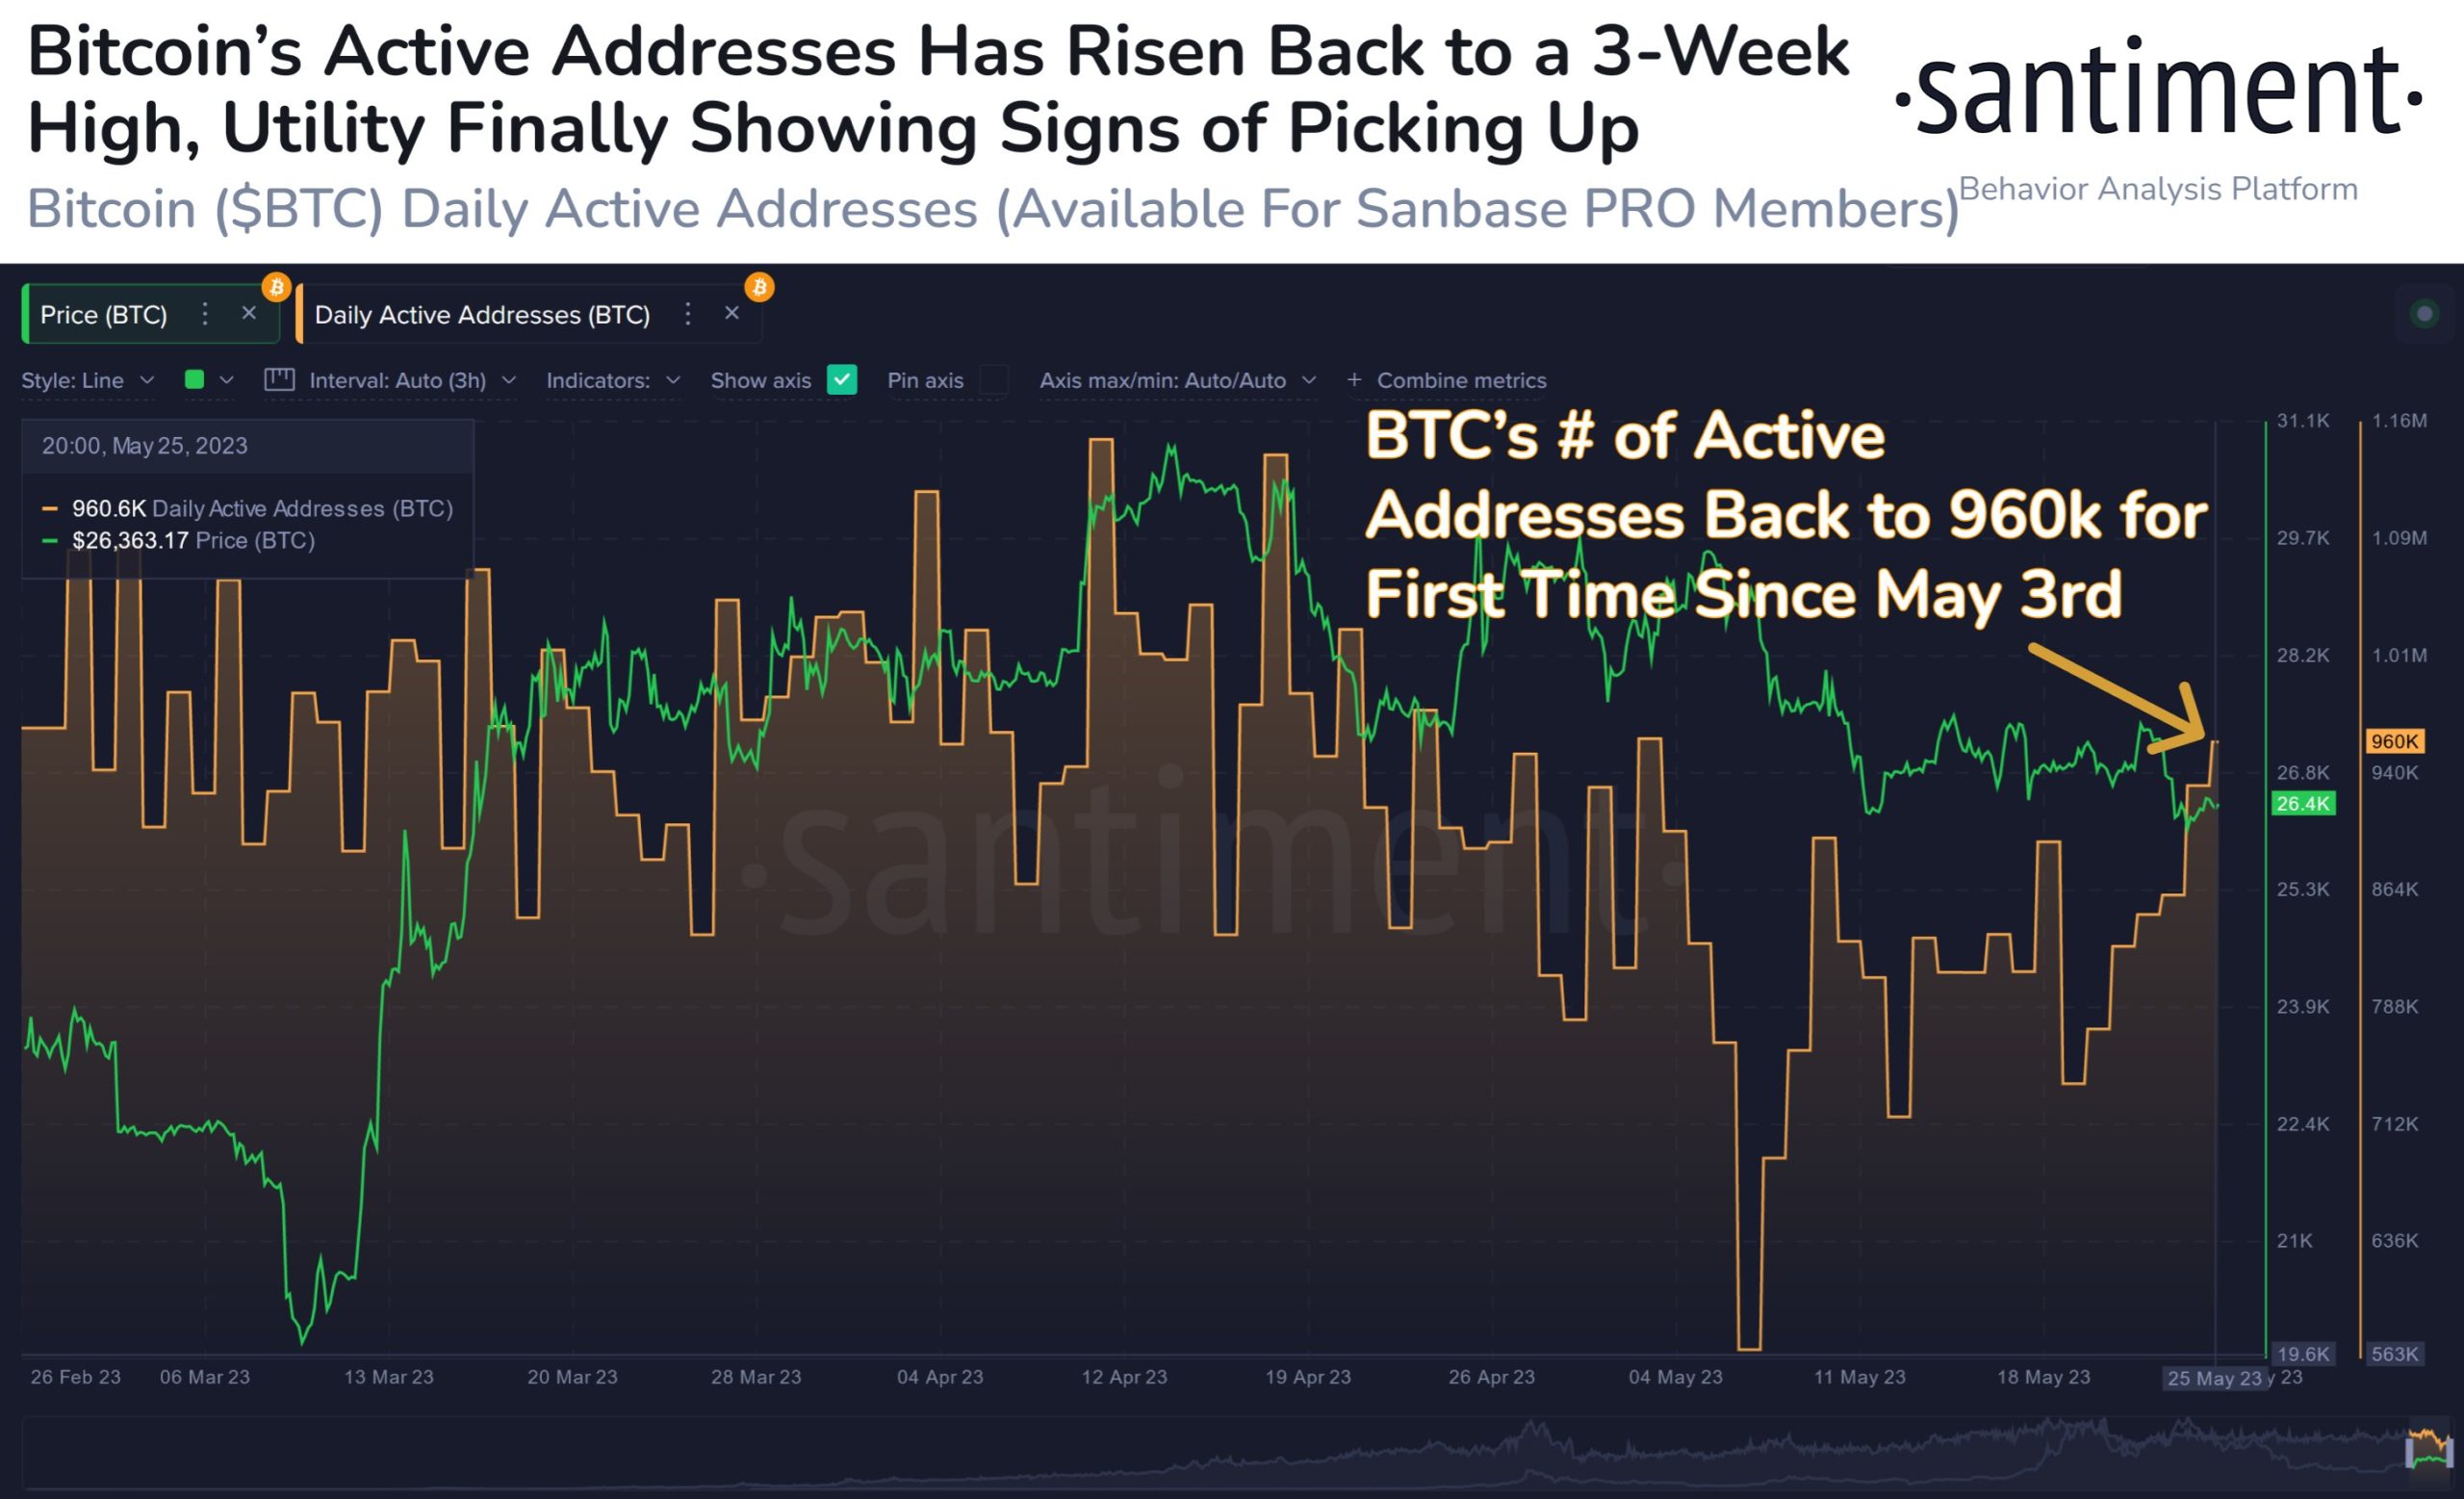 Santiment chart showing rise in Bitcoin active address